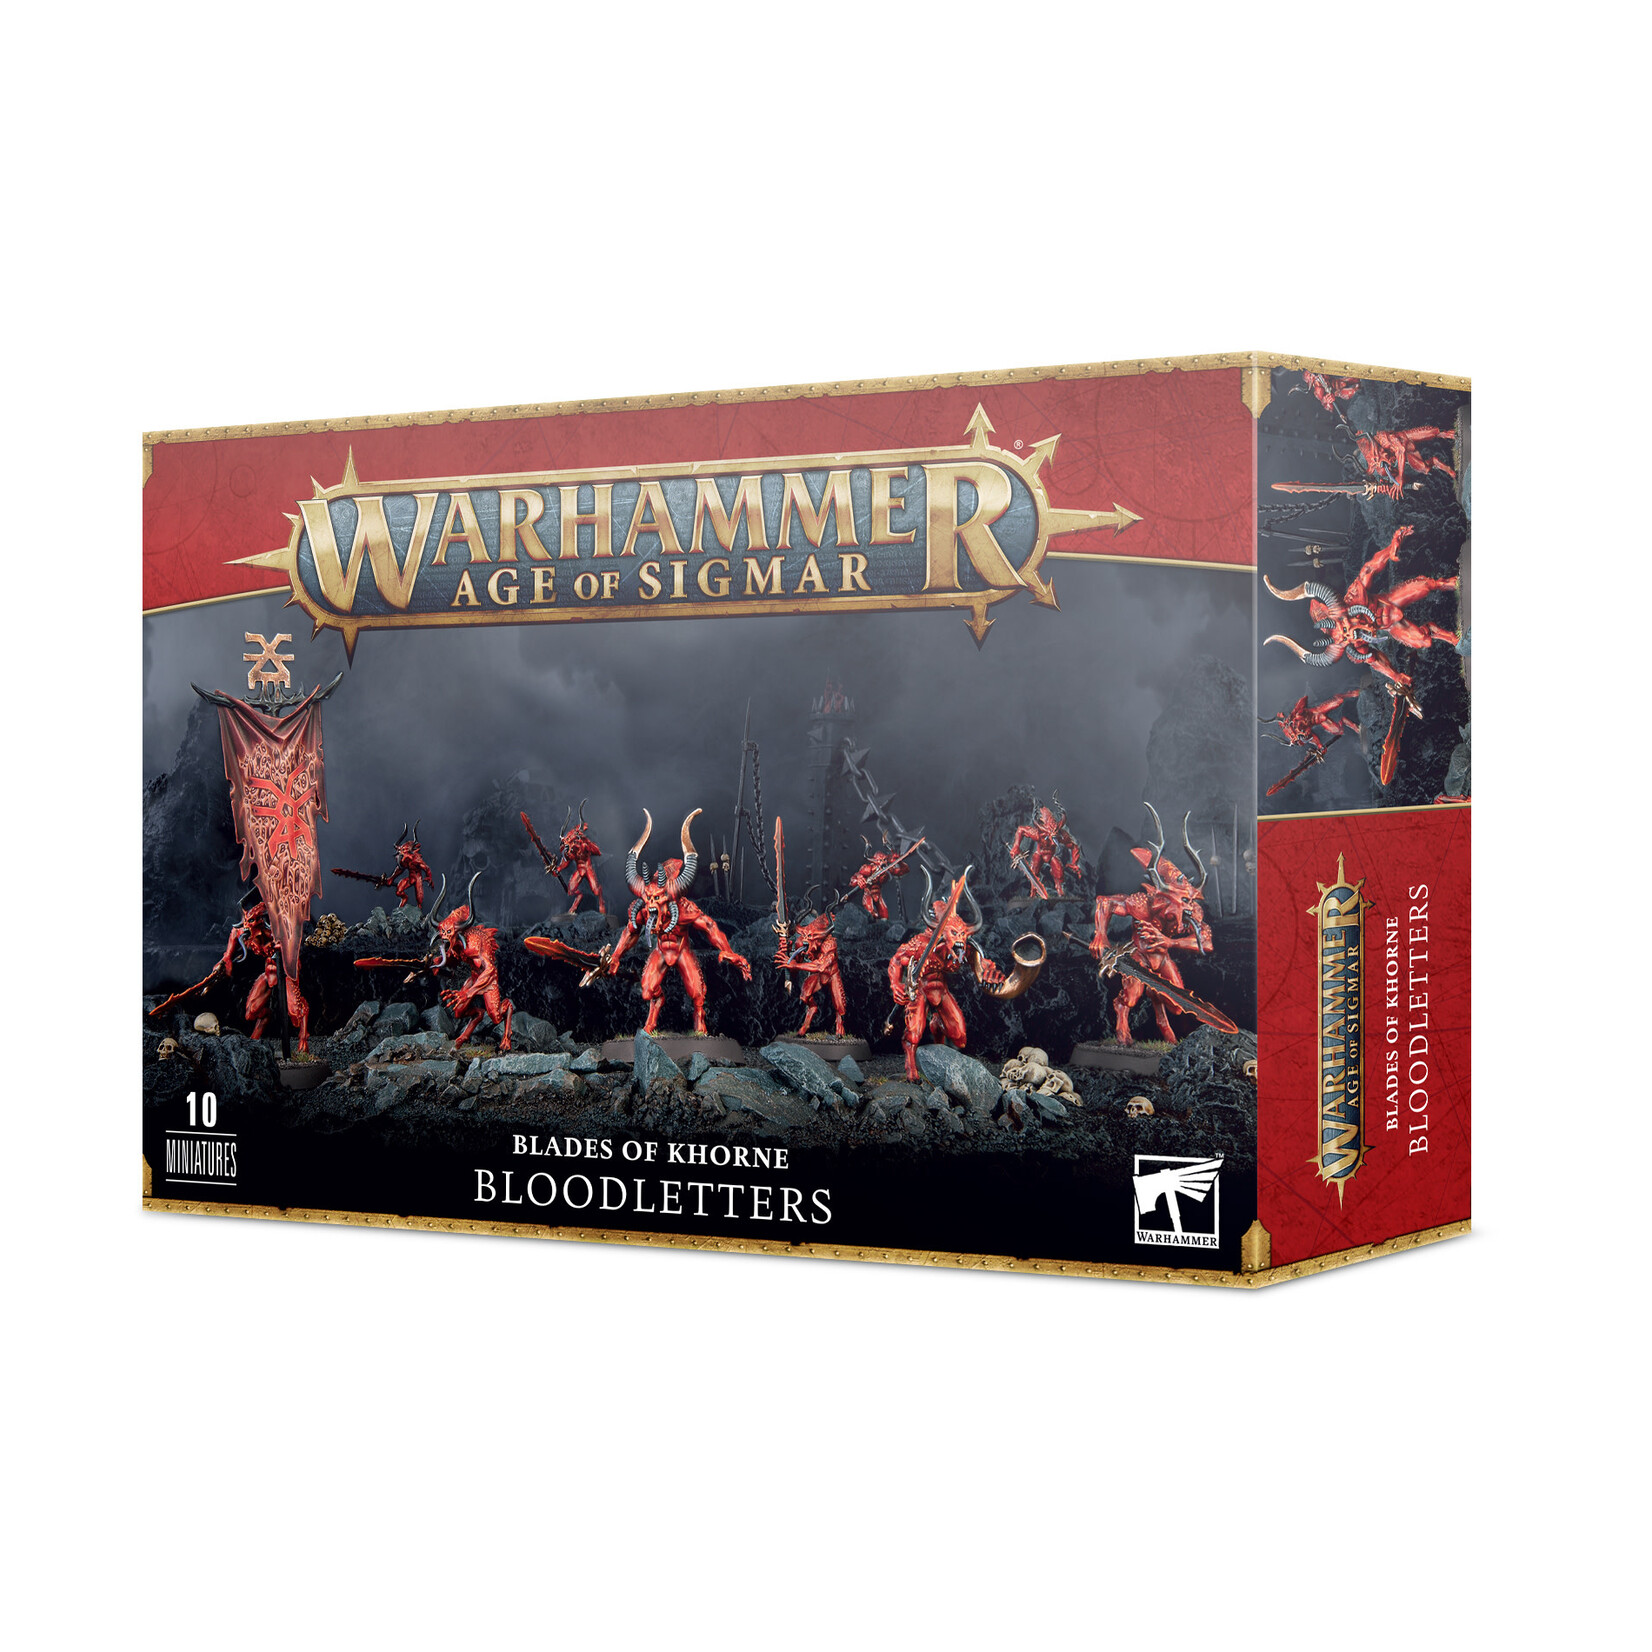 Age of Sigmar Age of Sigmar: Chaos Daemons: Daemons of Khorne: Bloodletters